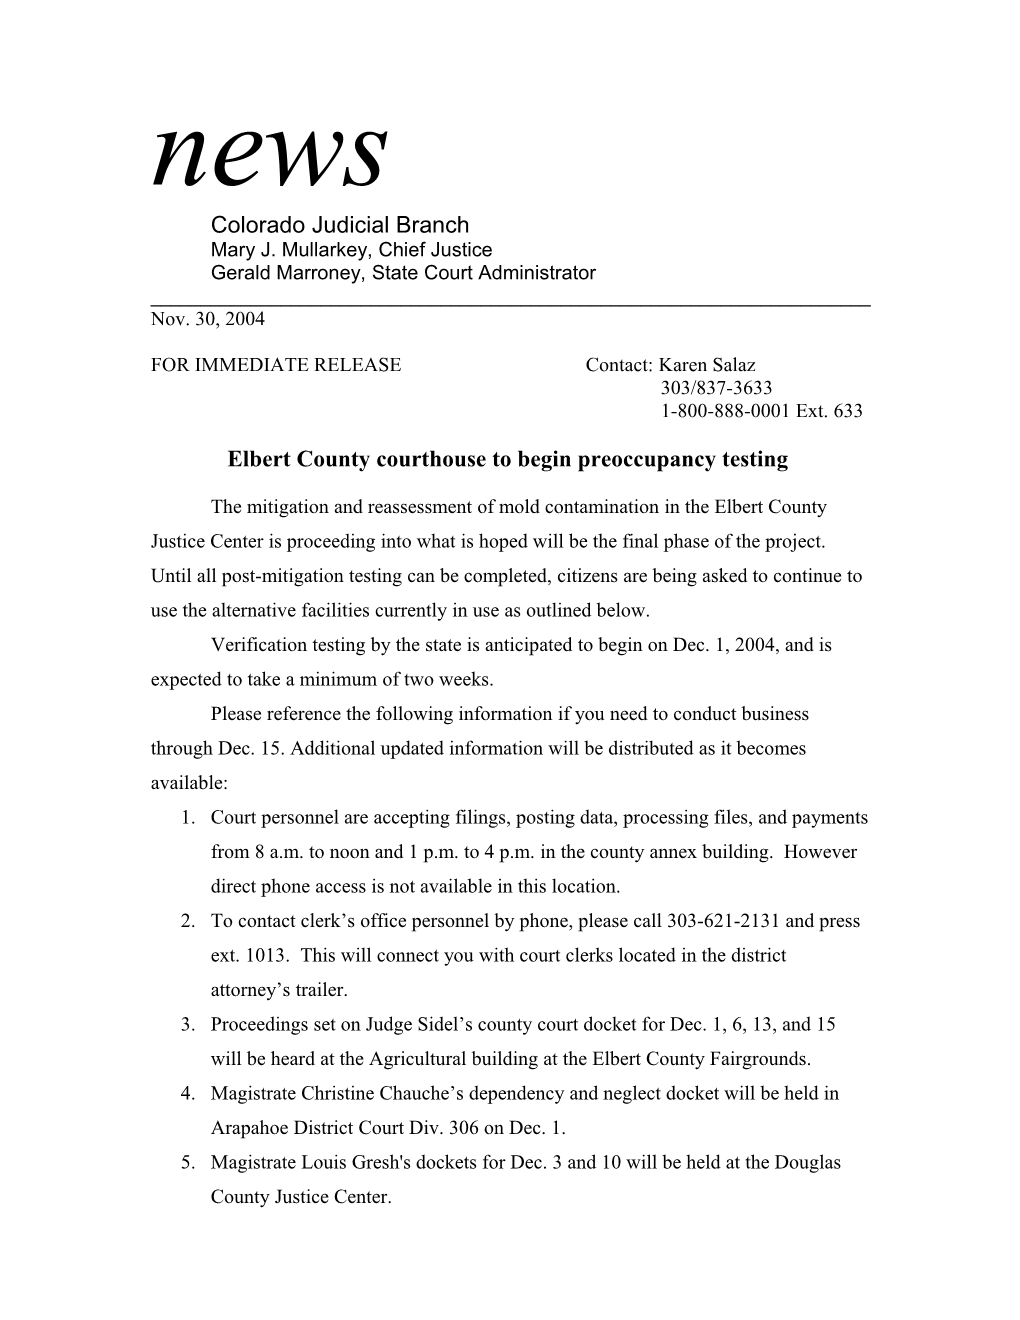 Elbertcounty Courthouse to Begin Preoccupancy Testing